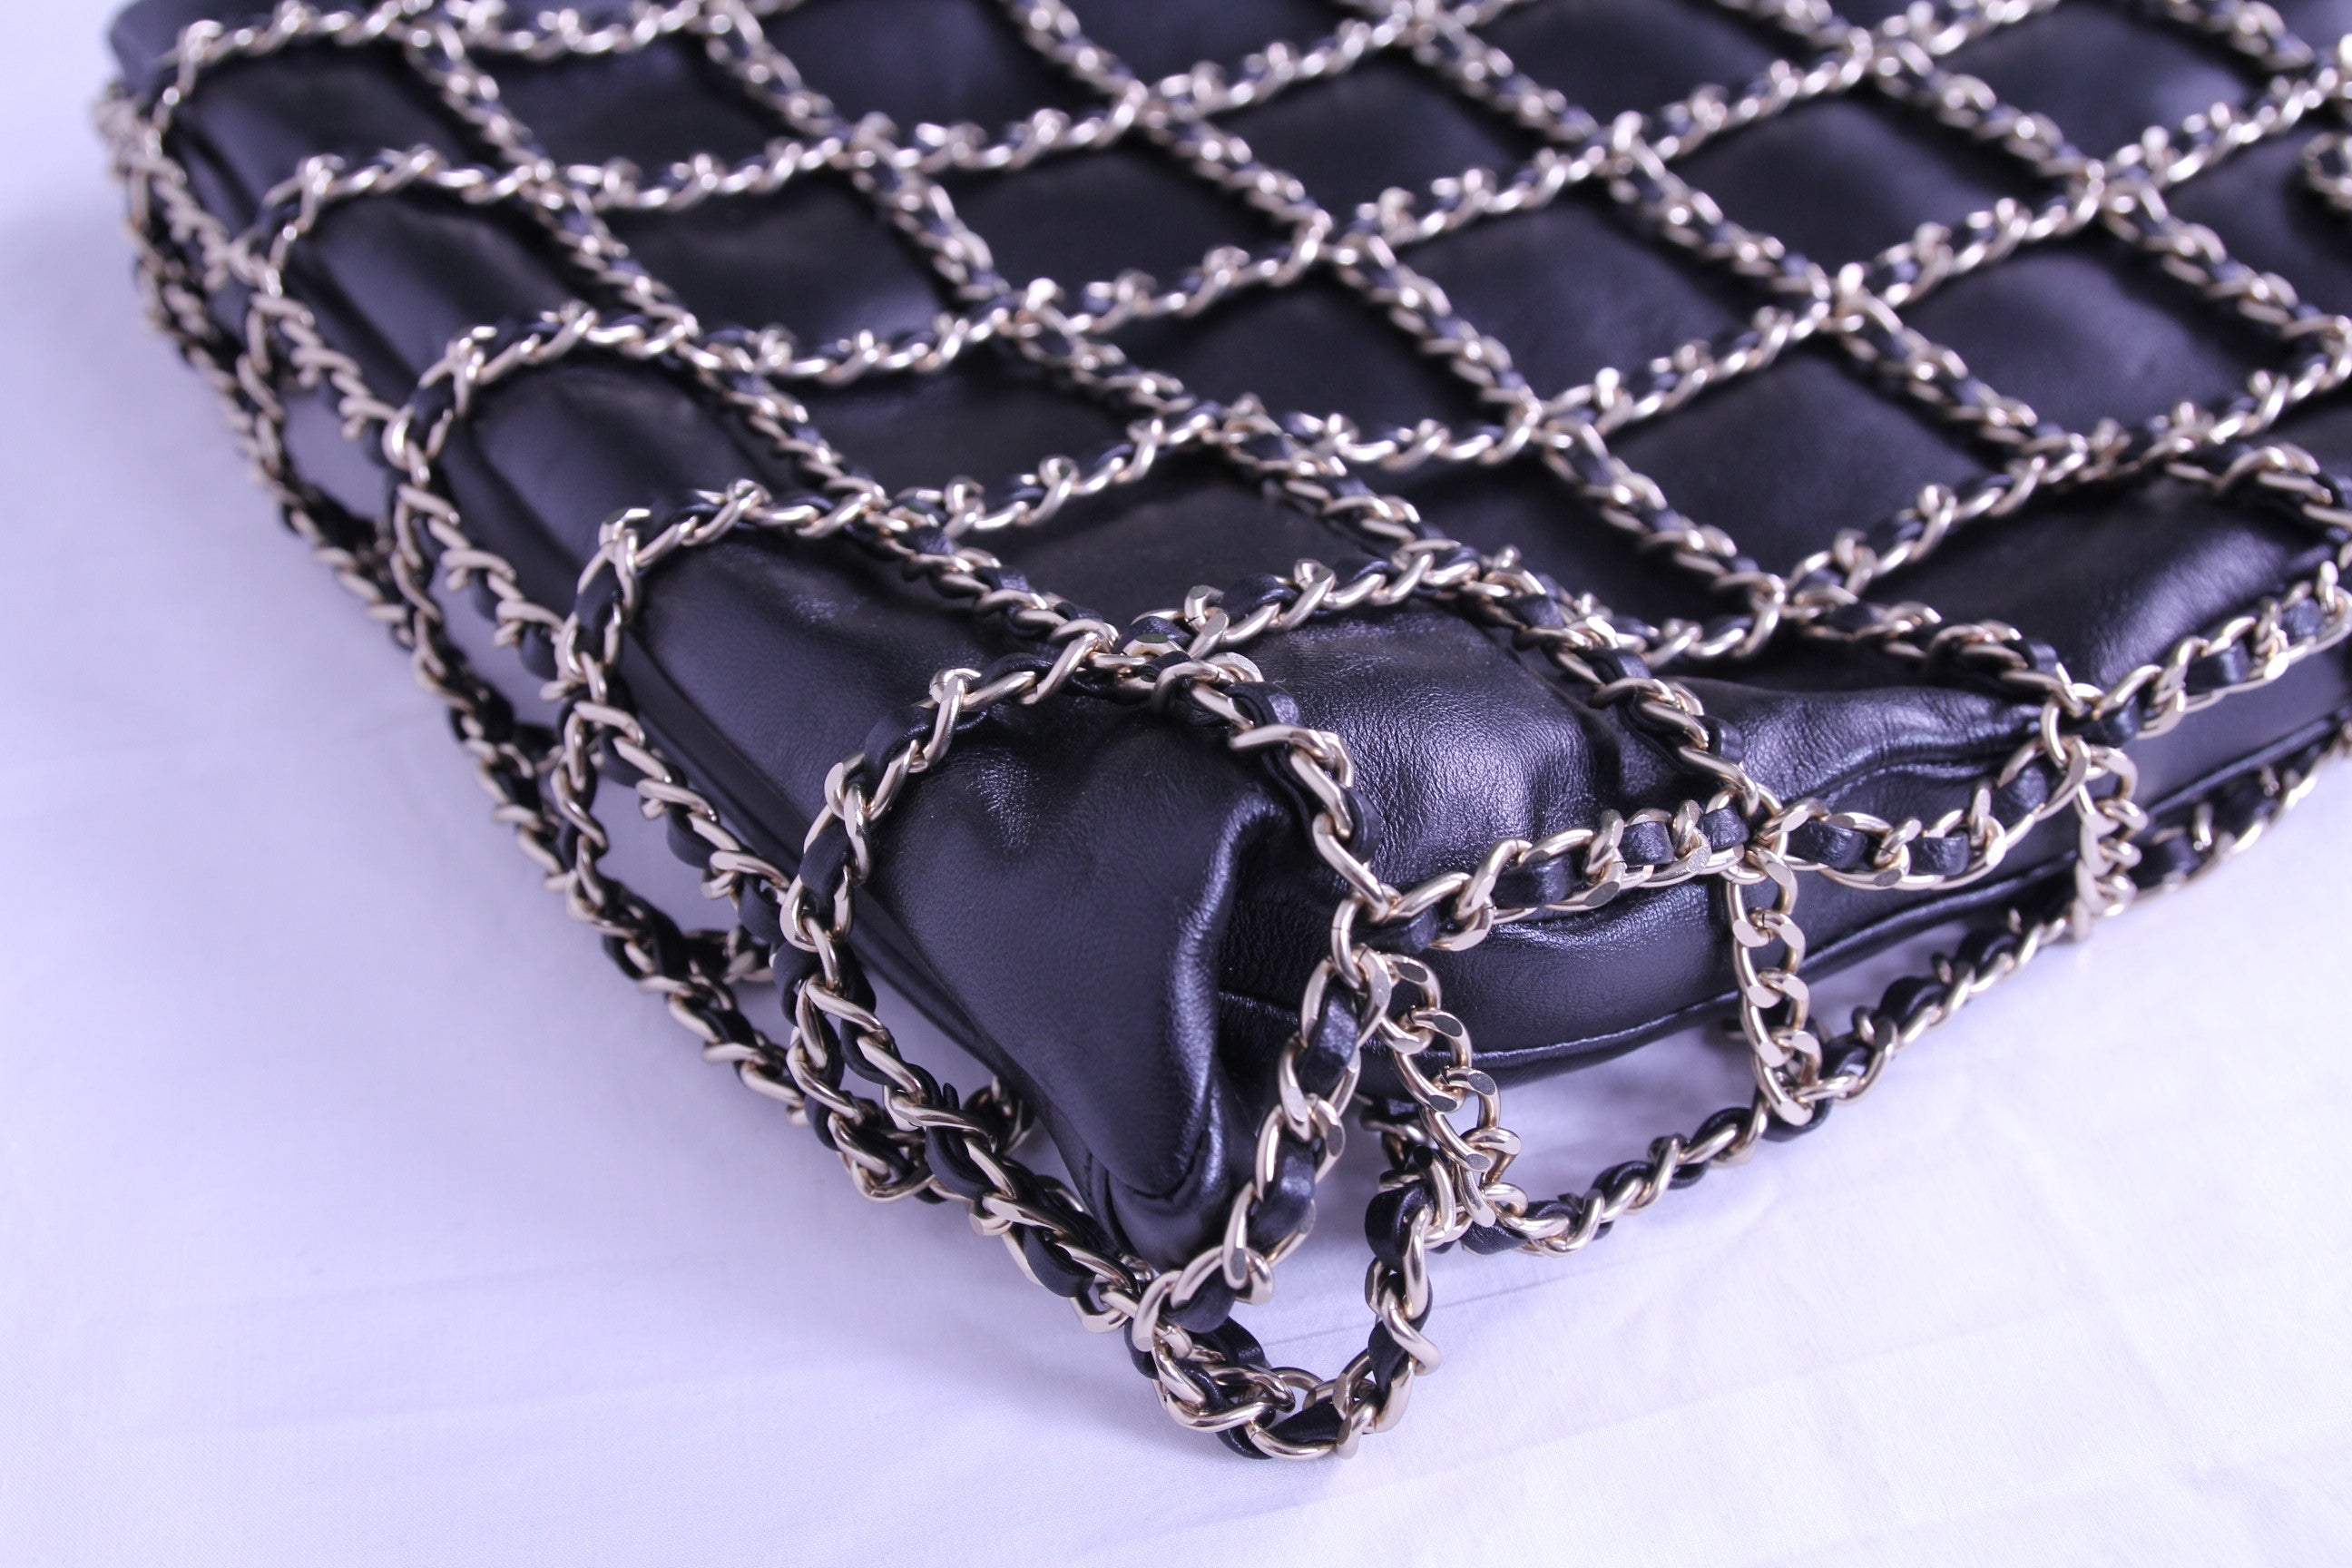 Corner of Chanel caged tote finished in black calfskin